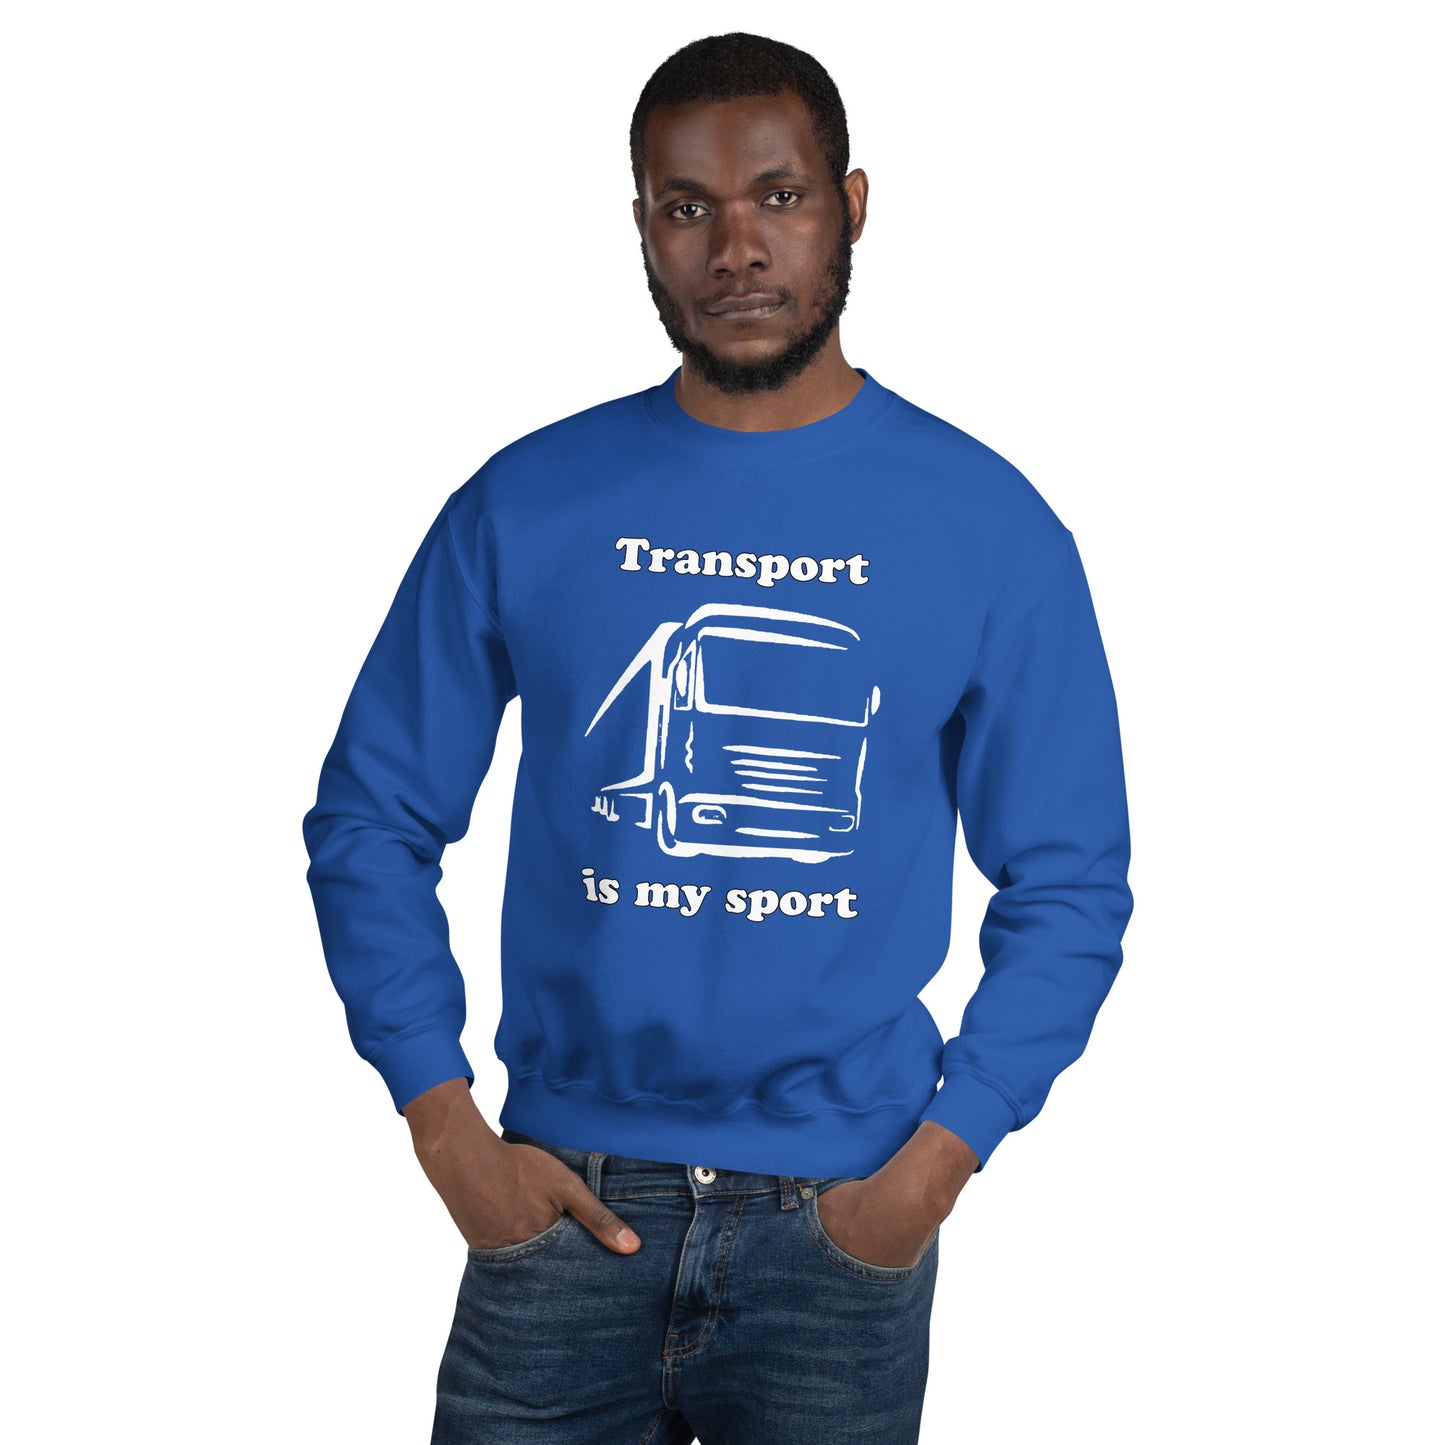 Man with royal blue sweatshirt with picture of truck and text "Transport is my sport"